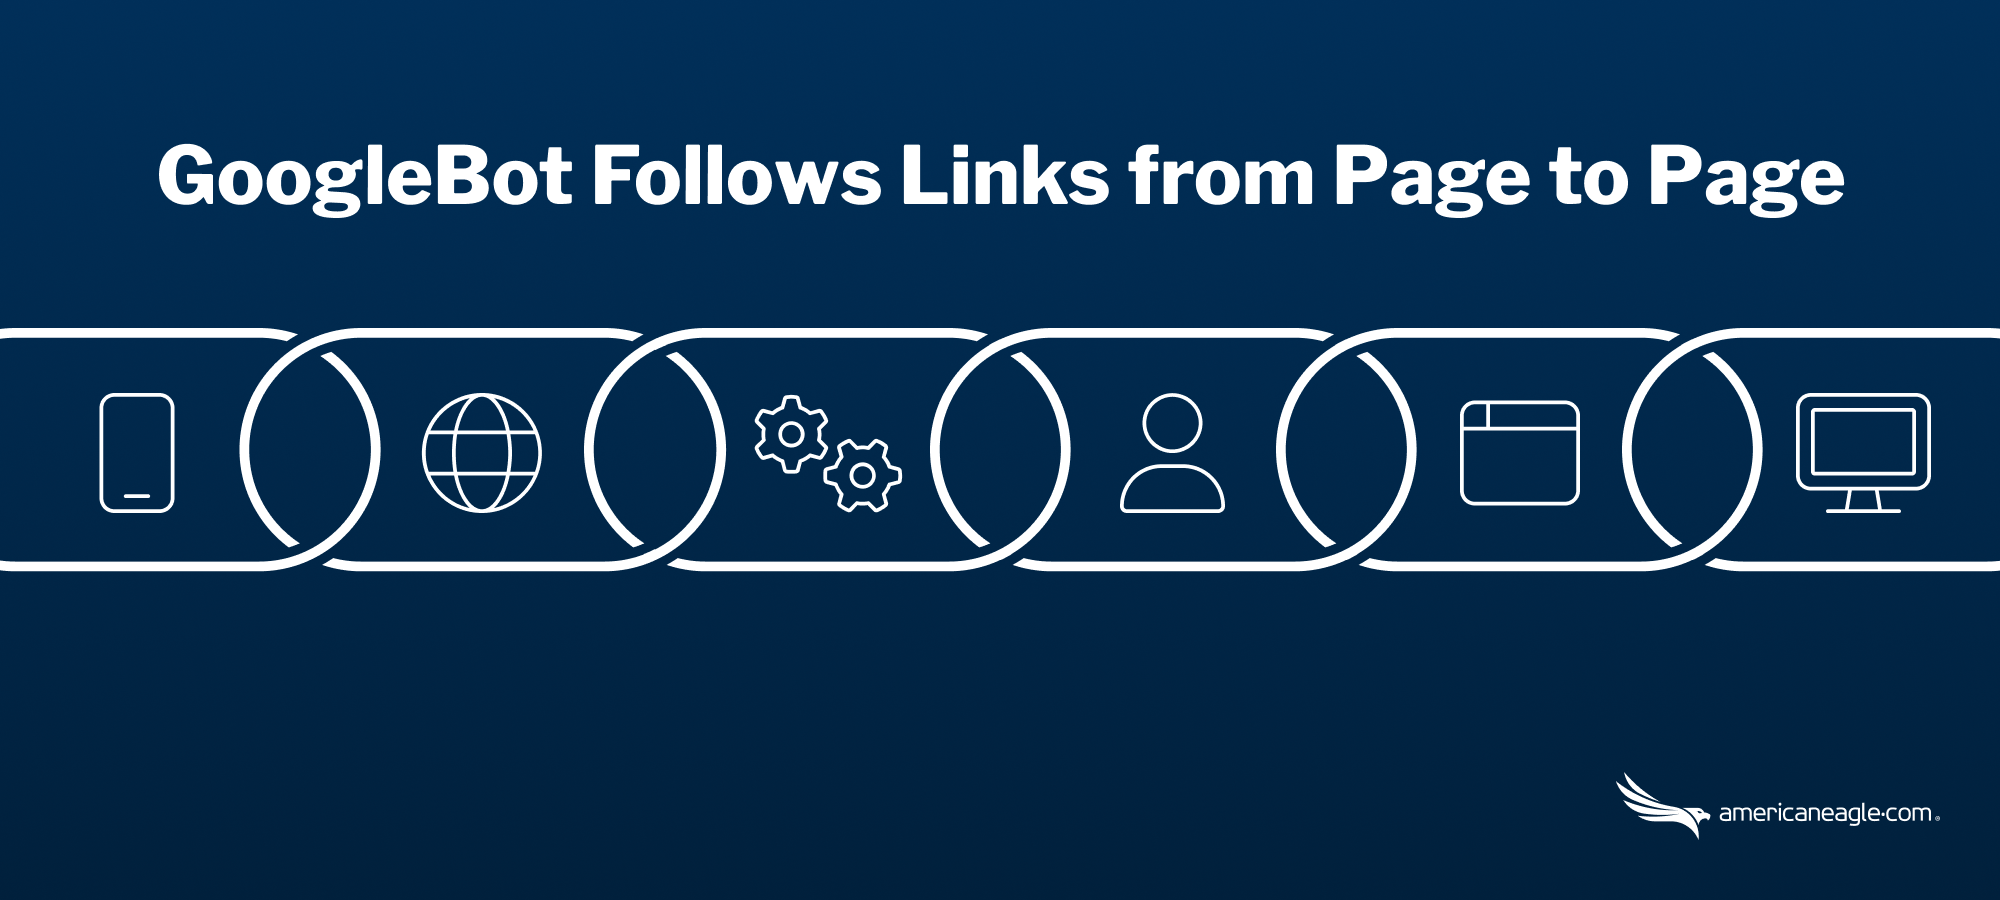 Infographic depicting how the Googlebot Crawler follows links from page to page across a website 